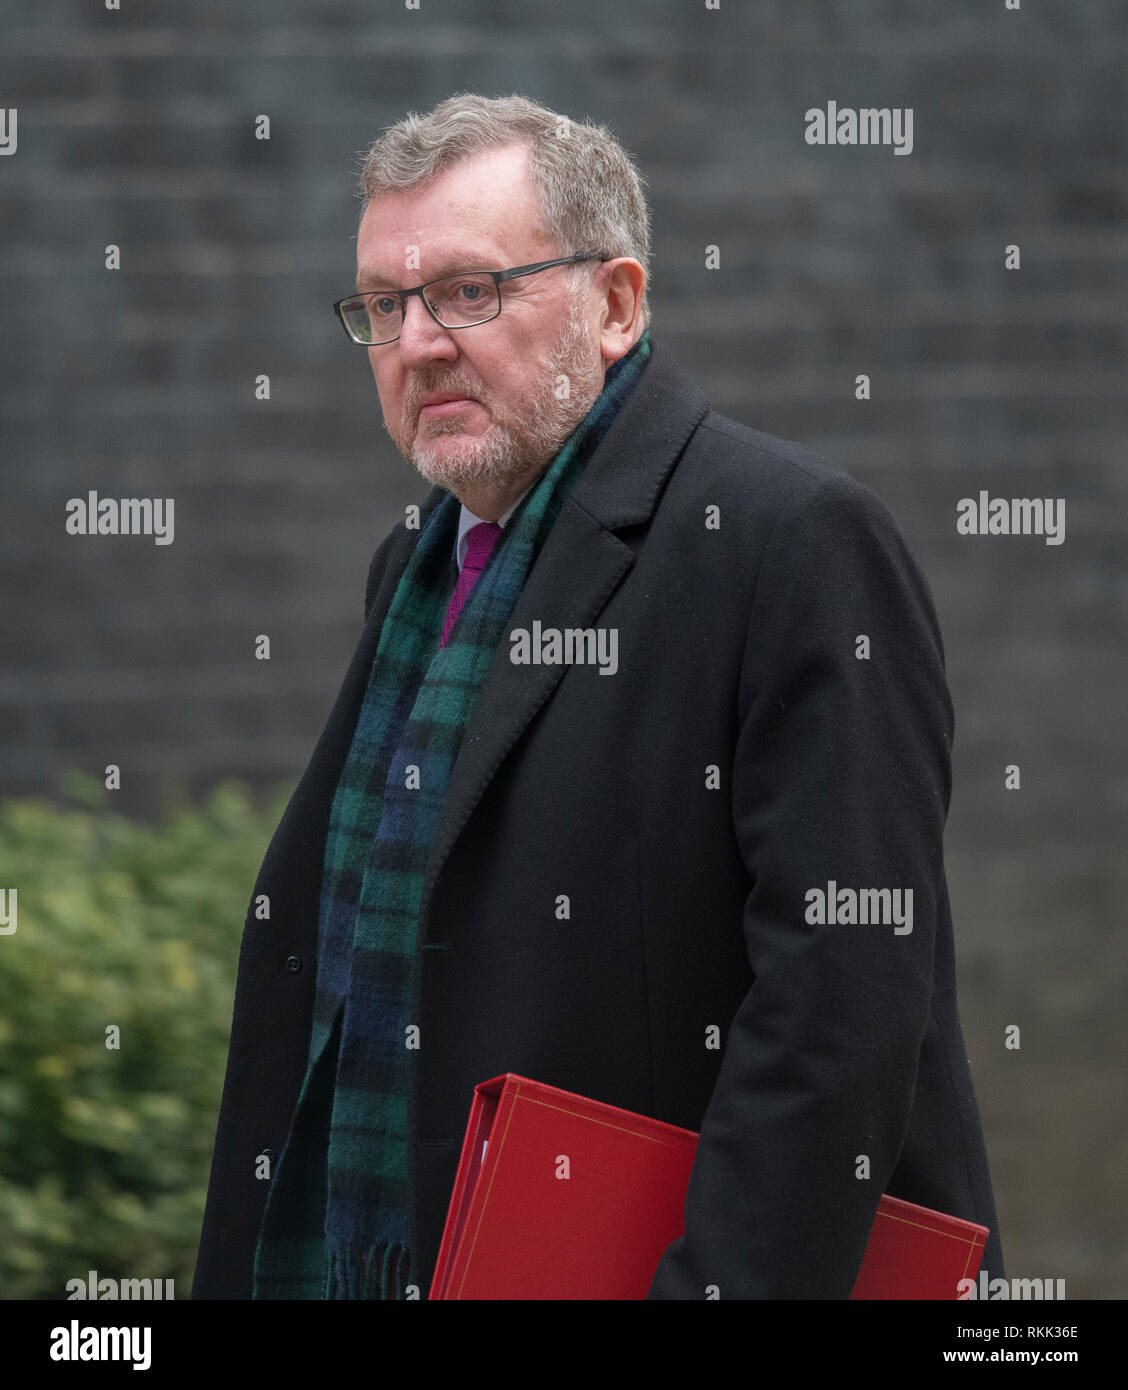 Downing Street, London, UK. 12 February 2019. Government Ministers arrive in Downing Street for weekly cabinet meeting. David Mundell, Secretary of State for Scotland. Credit: Malcolm Park/Alamy Live News. Stock Photo